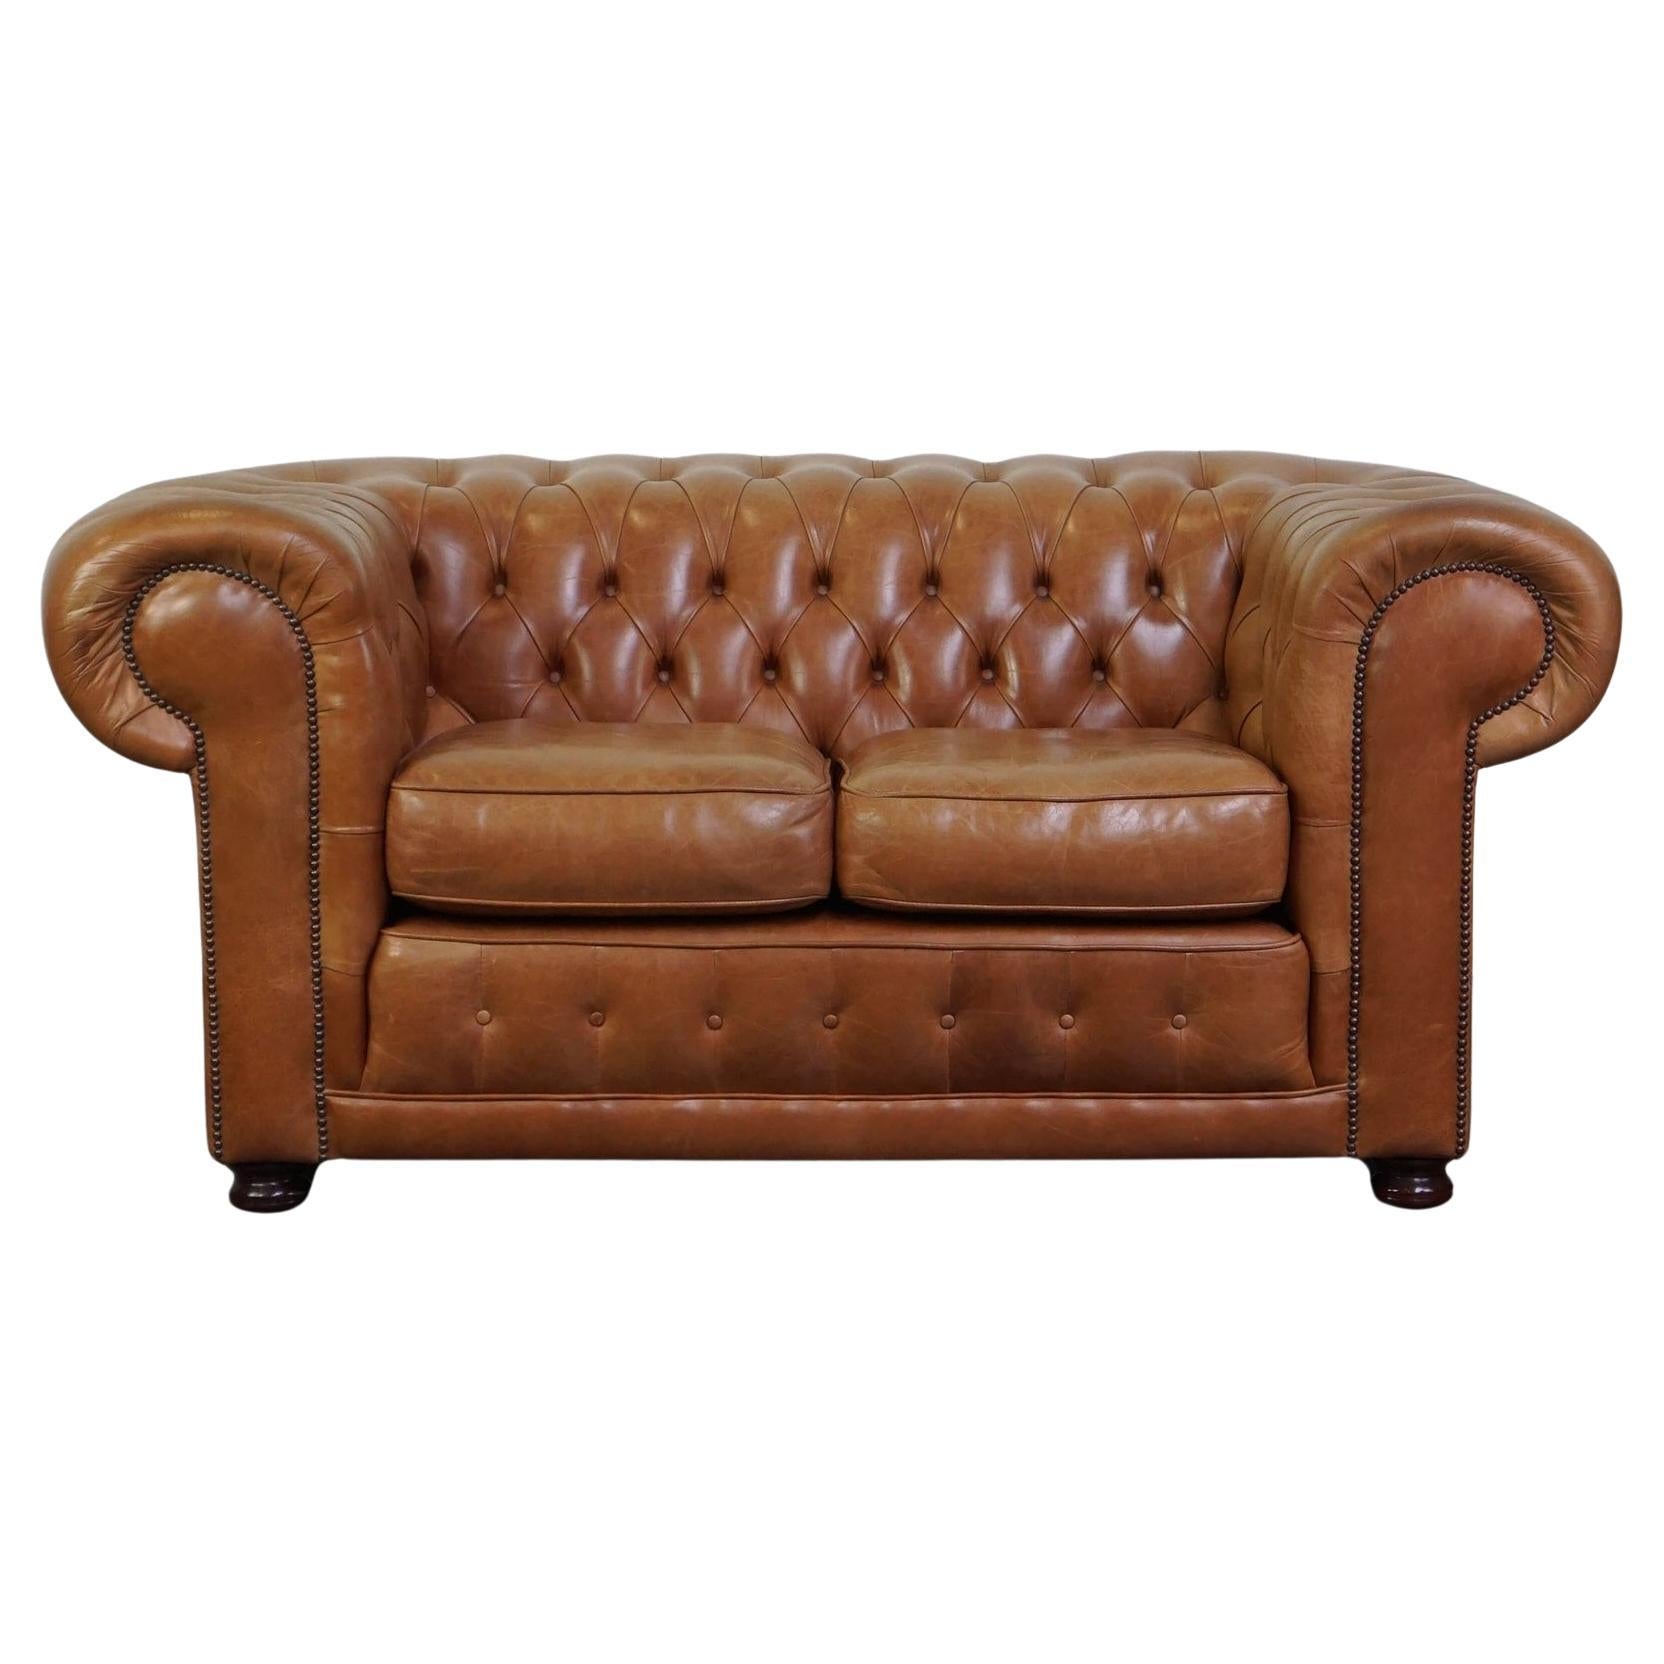 Beautiful Light Brown/Cream-Colored English Leather Chesterfield 2-Seater Sofa For Sale